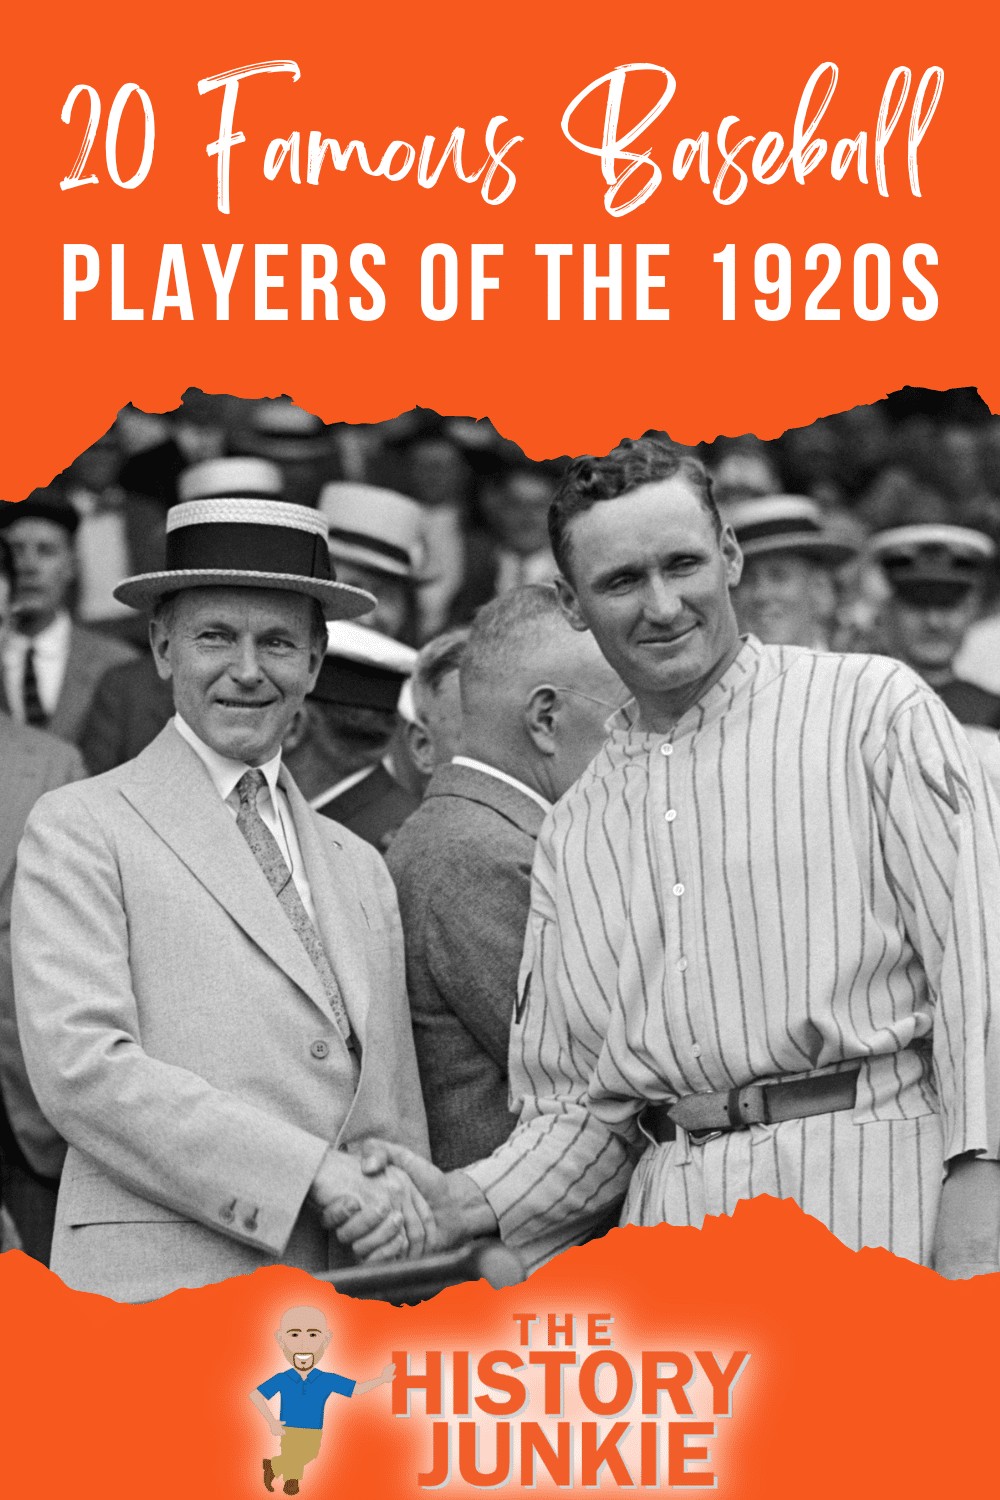 20 Famous Baseball Players in the 1920s - The History Junkie